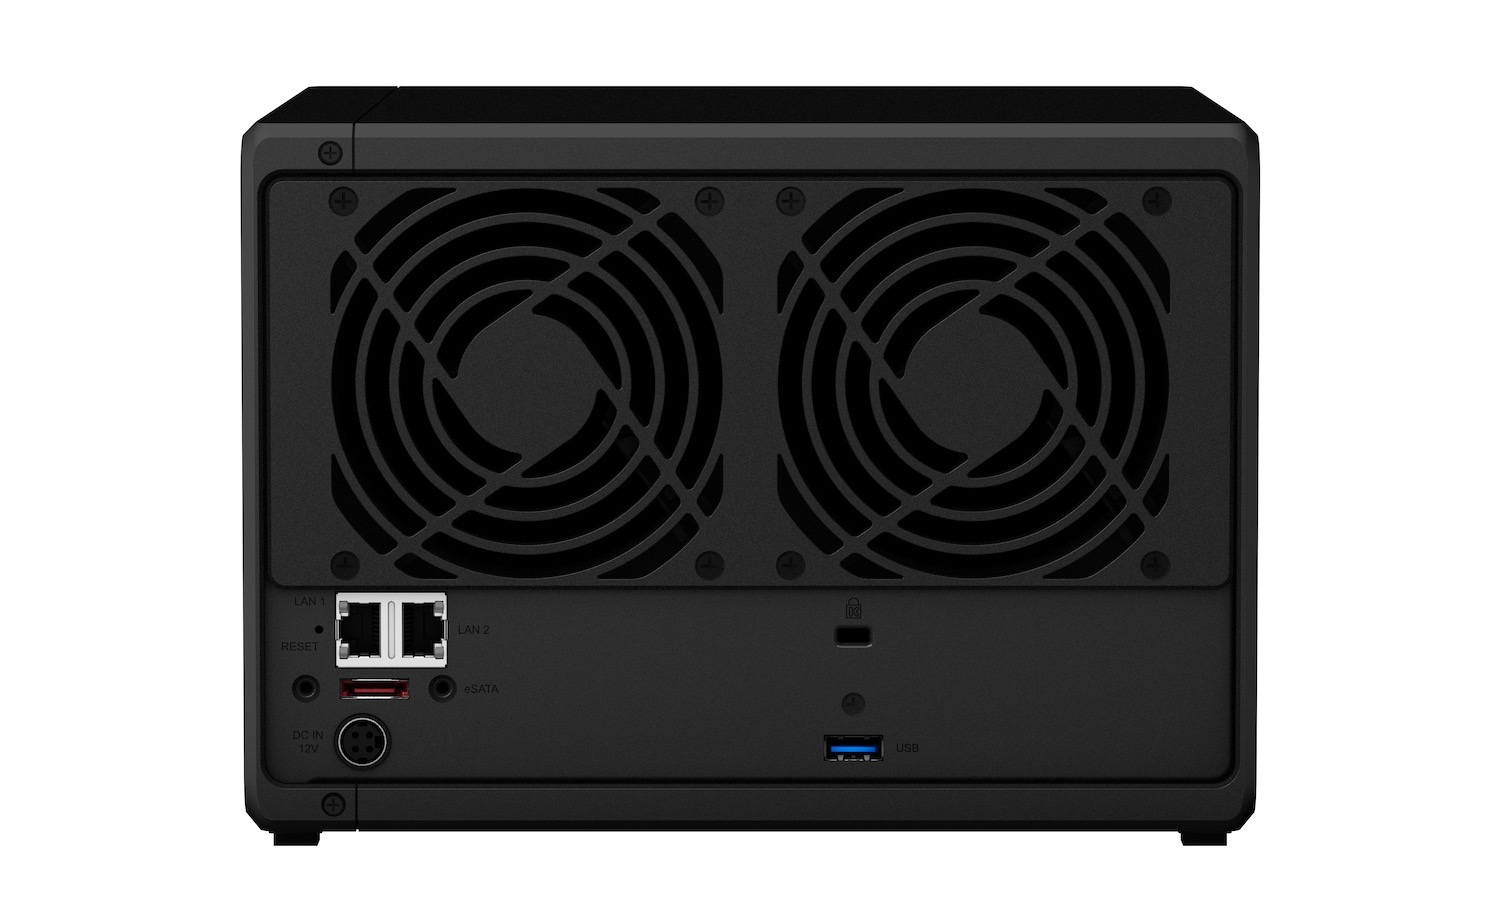 Synology DS1019